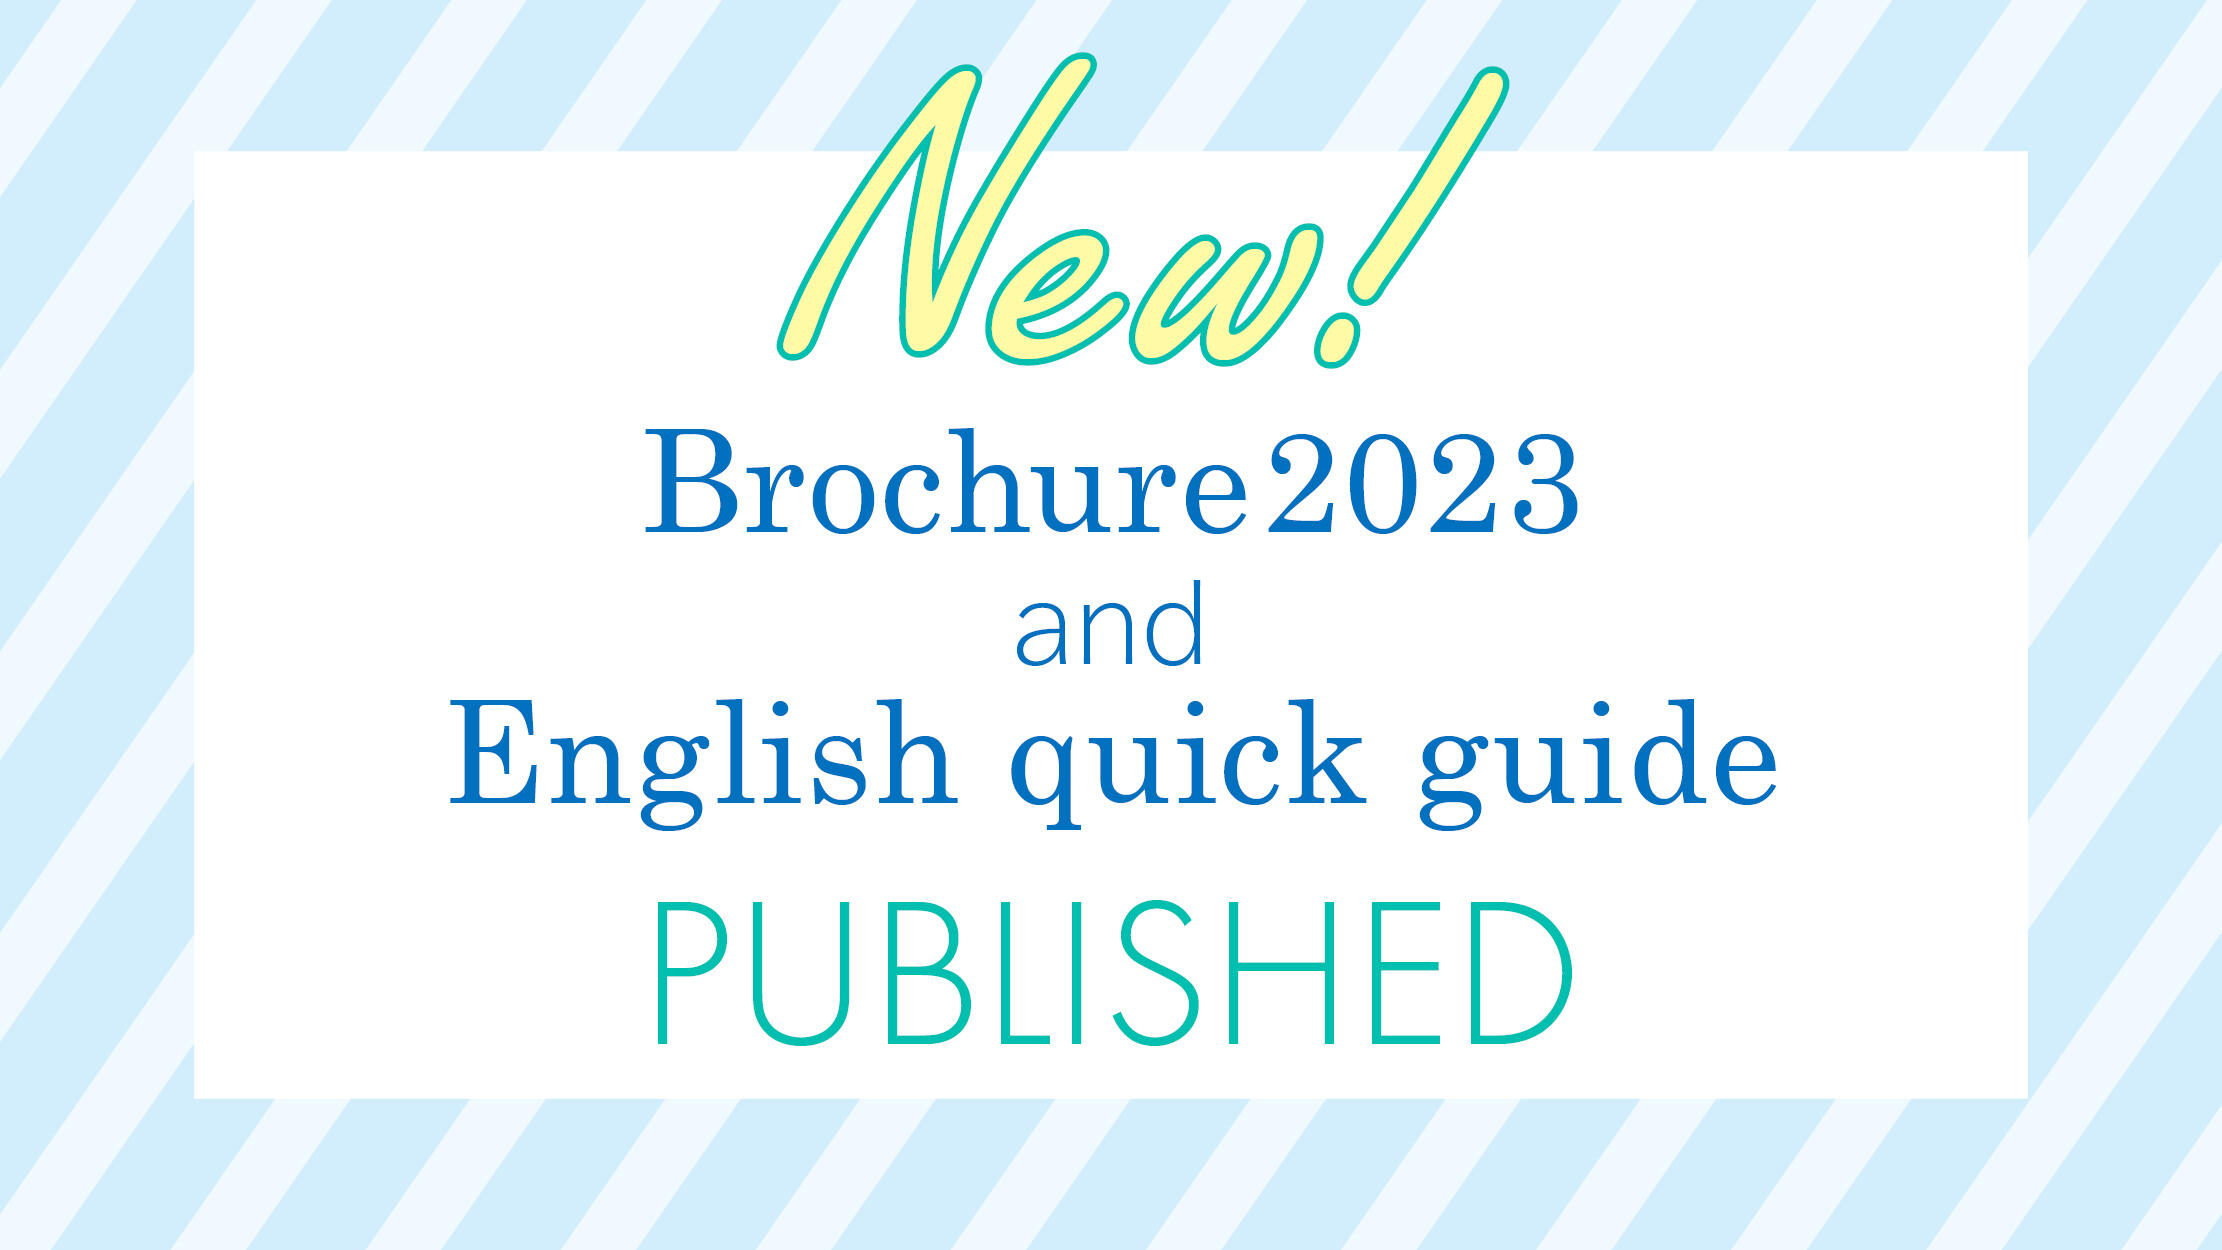 BRI Brochure 2023 and English quick guide published